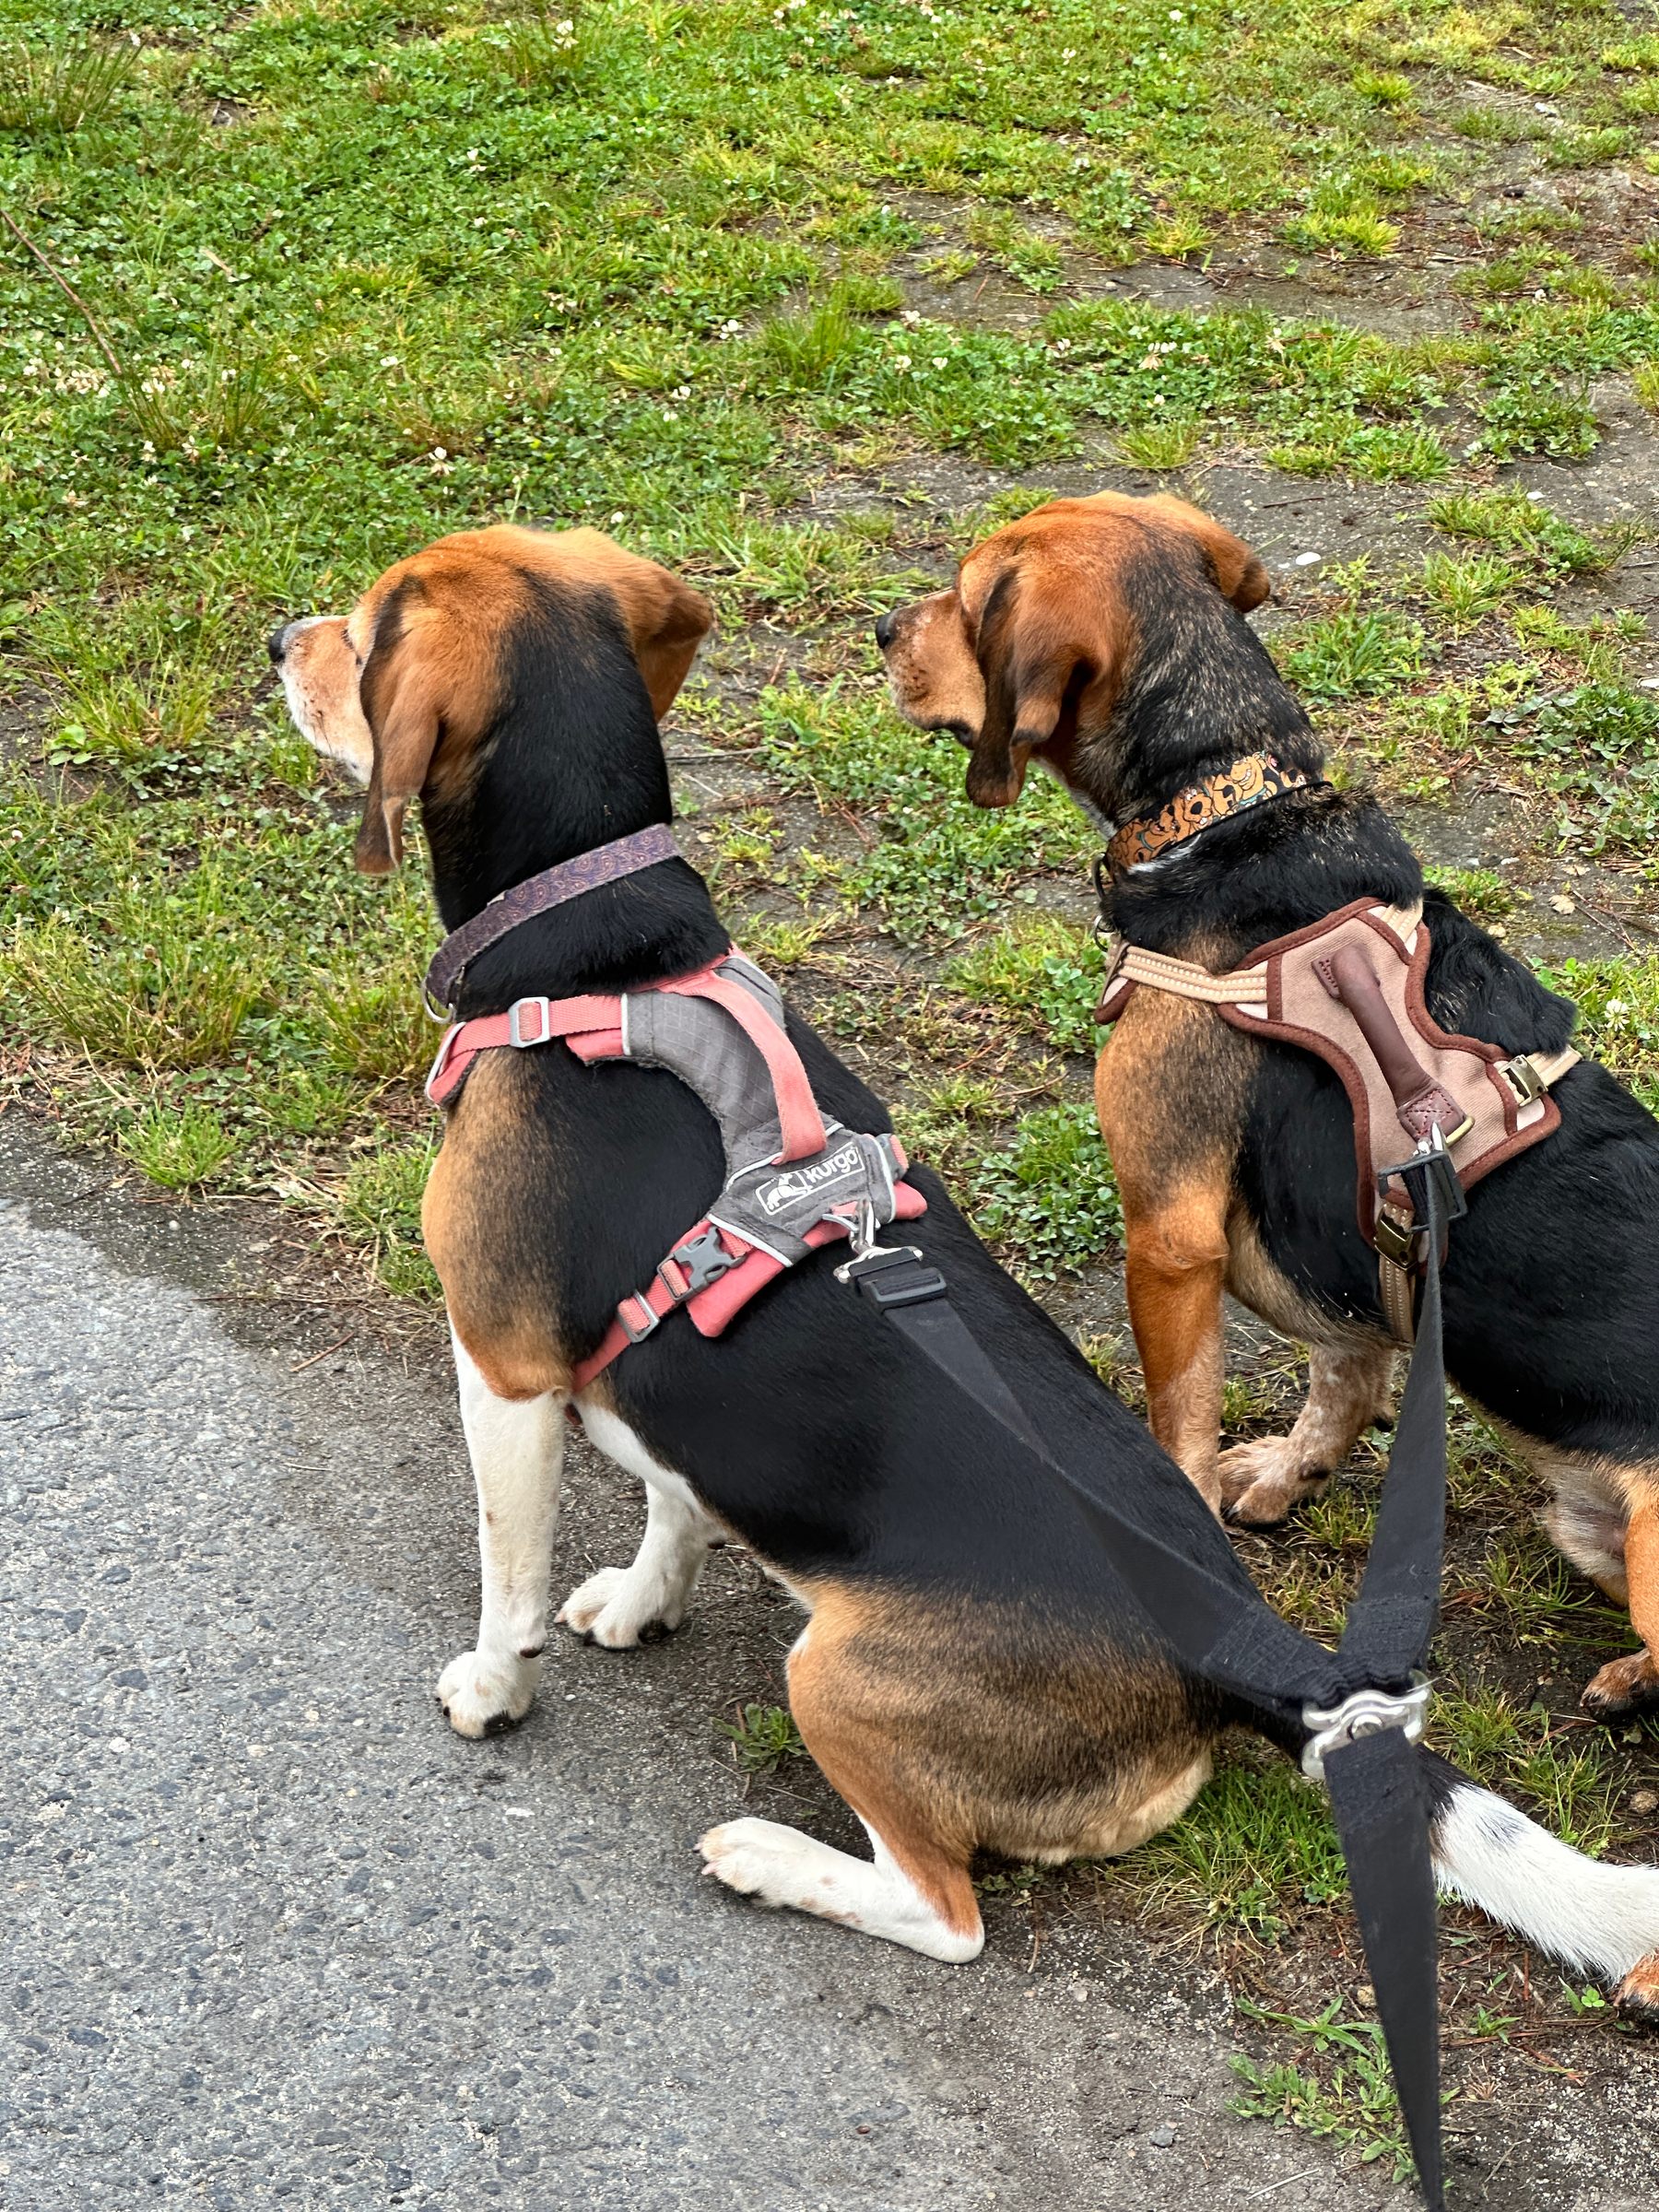 Closeup of the beagles— super focused on something out of frame. 